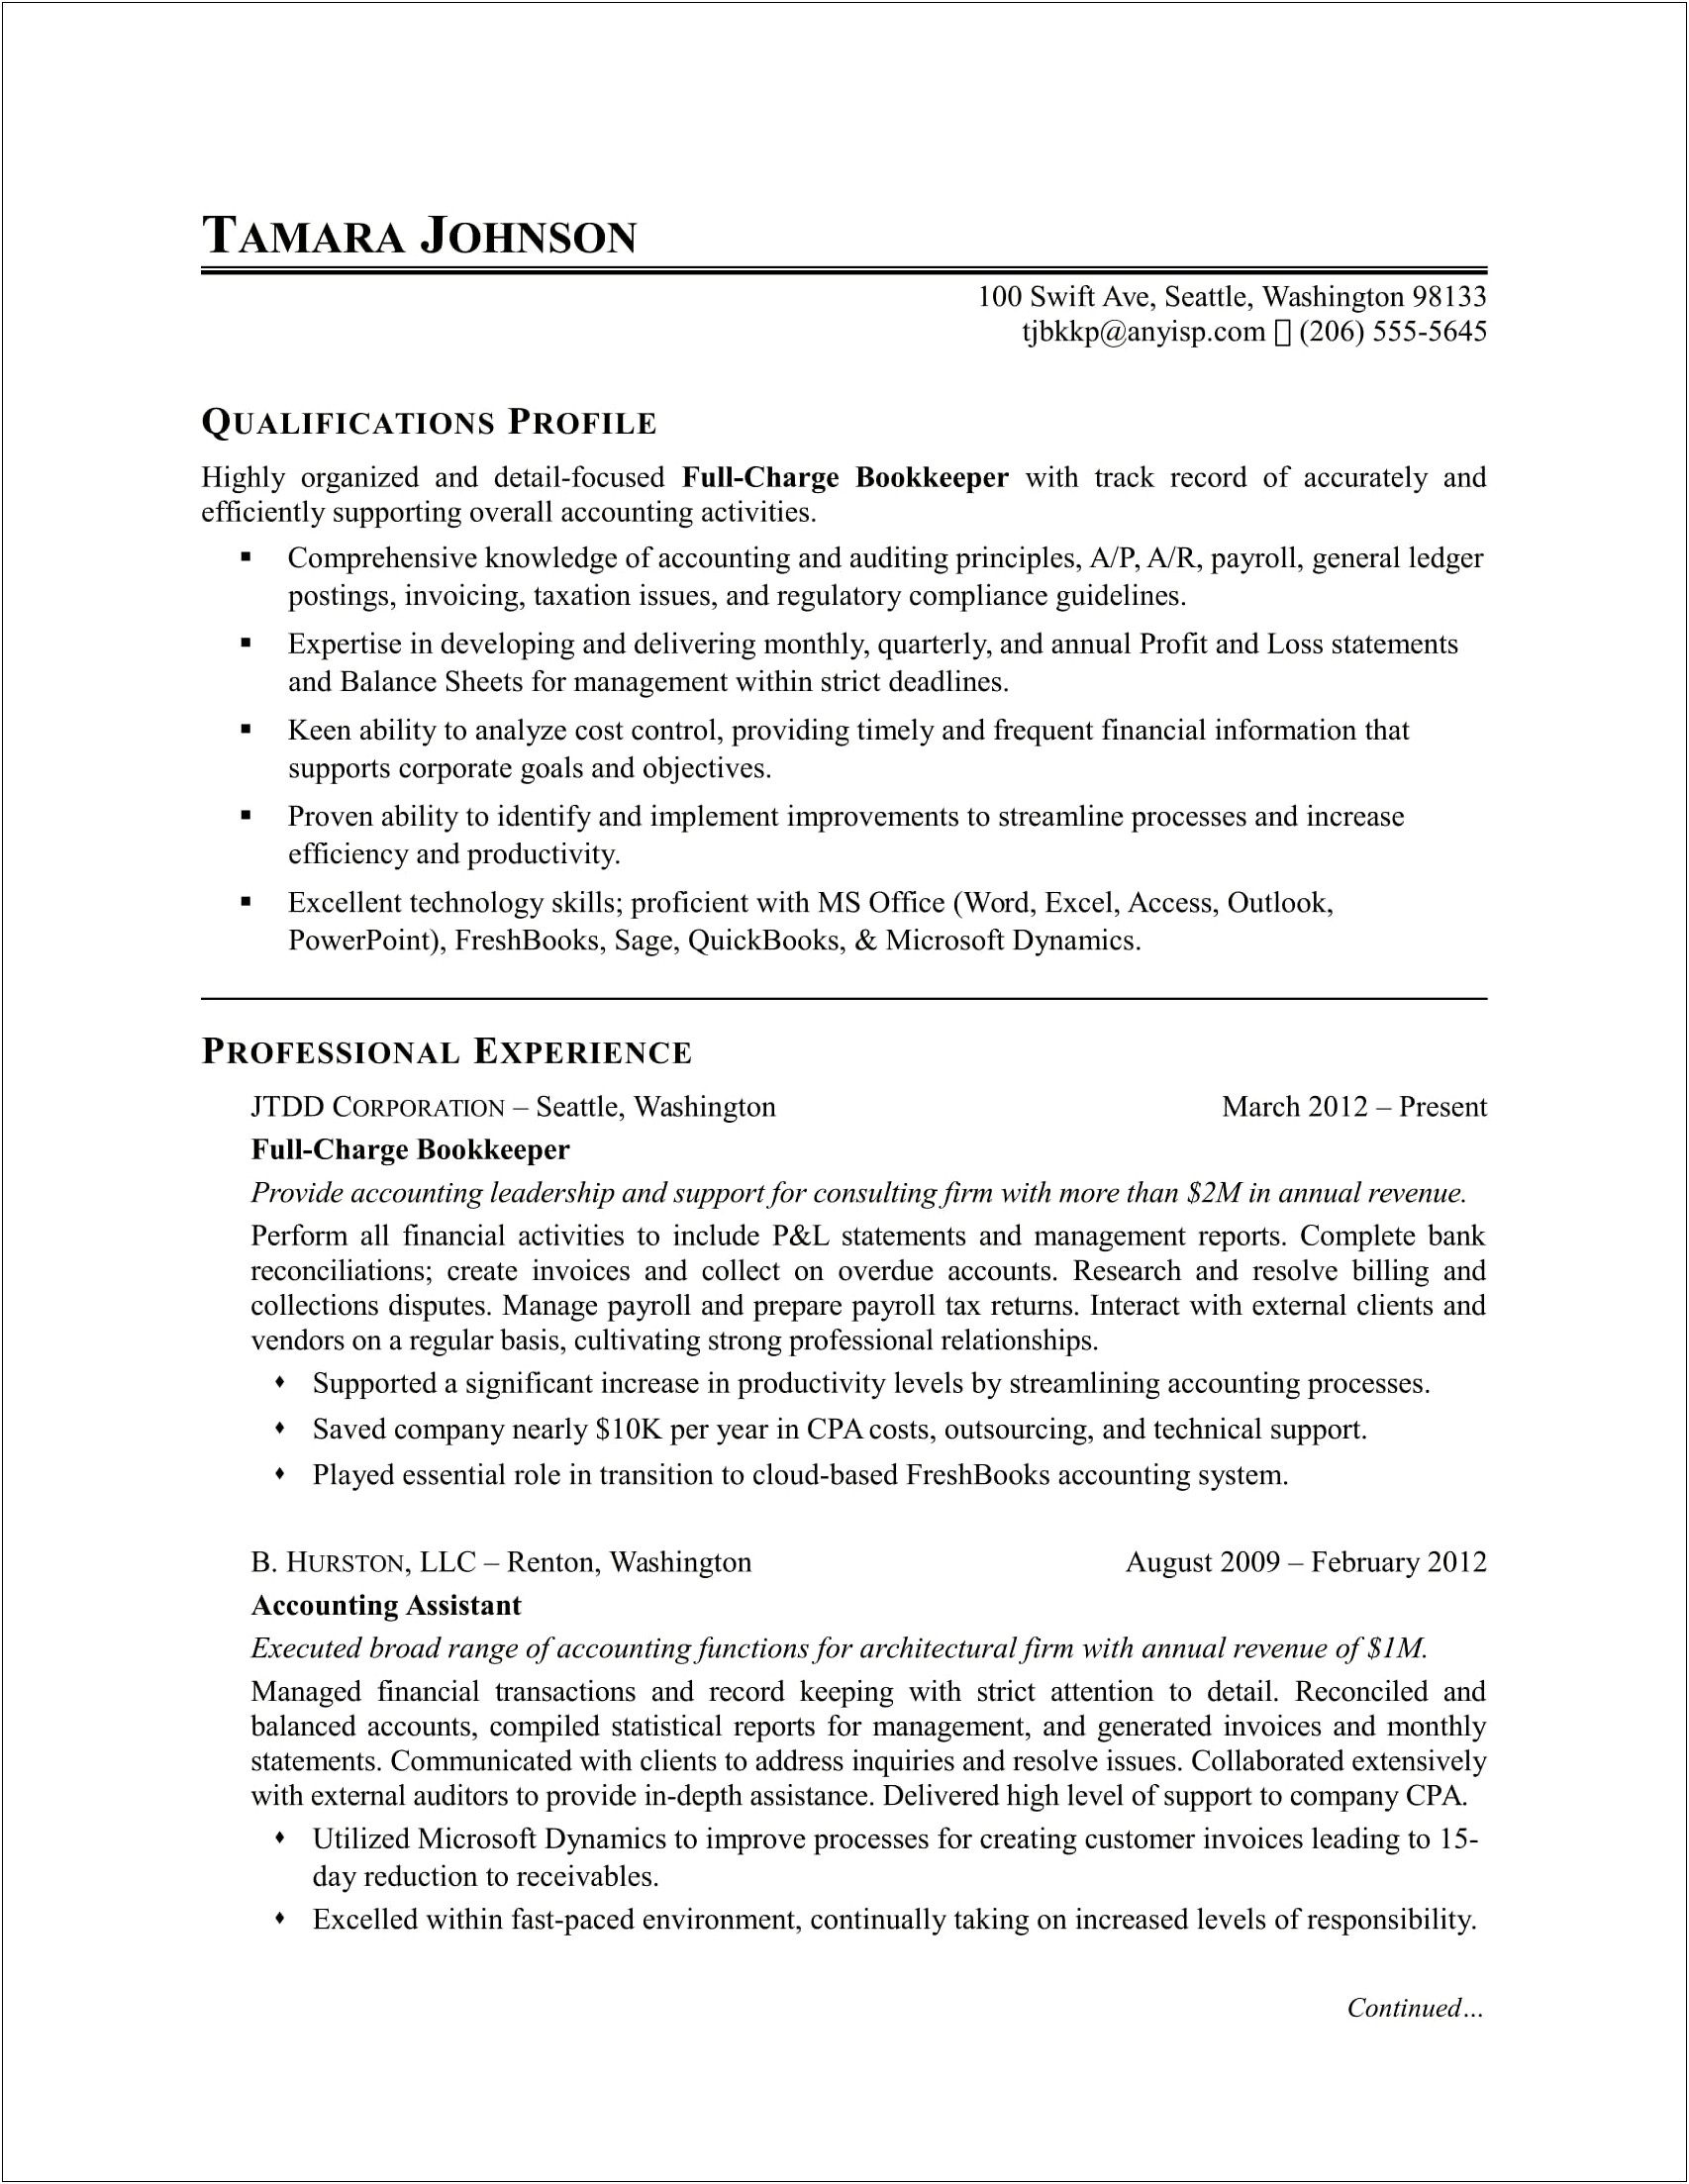 Resume Sample For Accountant With No Experience